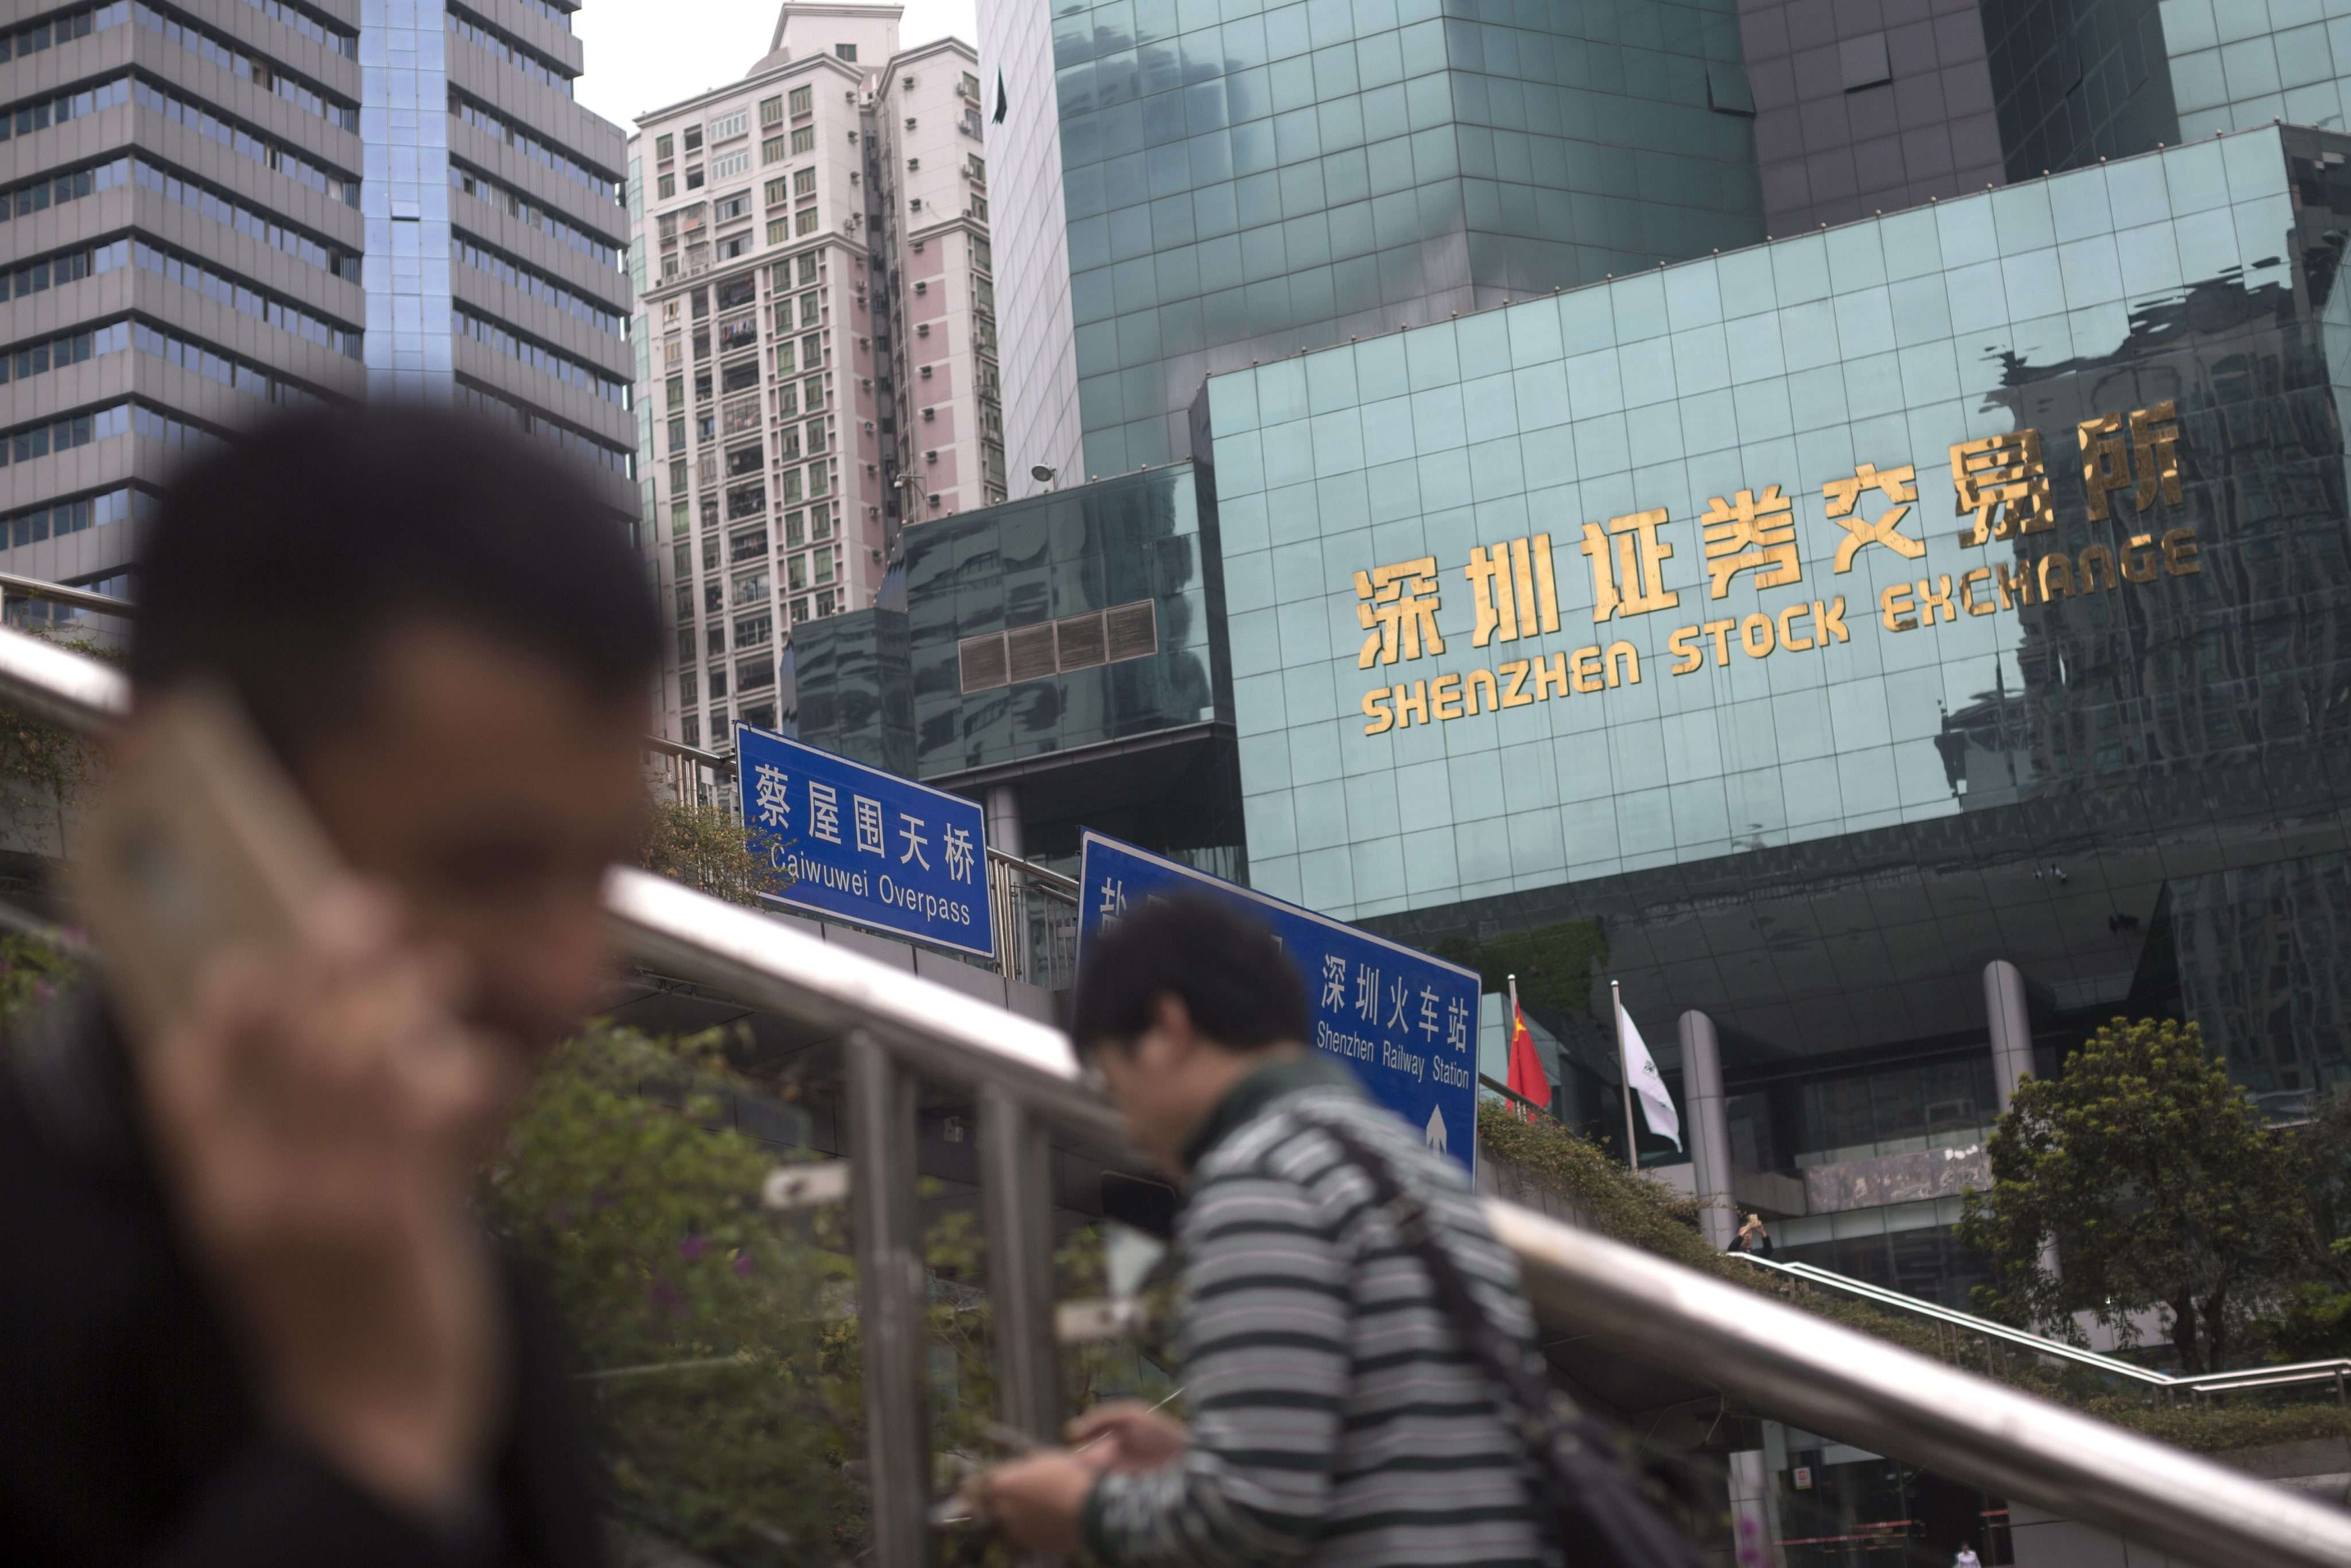 Shenzhen-Hong Kong Stock Connect may allow investors to trade on both bourses under a quota system. Photo: EPA epa05202350 People walk past the Shenzhen stock exchange in Shenzhen, Guangdong Province, China, 09 March 2016. According to the outline of the 13th five-year plan, China’s average annual rate of growth will slow from 7.8 per cent in the past five years to around 6.5 per cent, and per capita disposable income will also fall, from 7.7 per cent to around 6.5 per cent. EPA/FREDDY CHAN